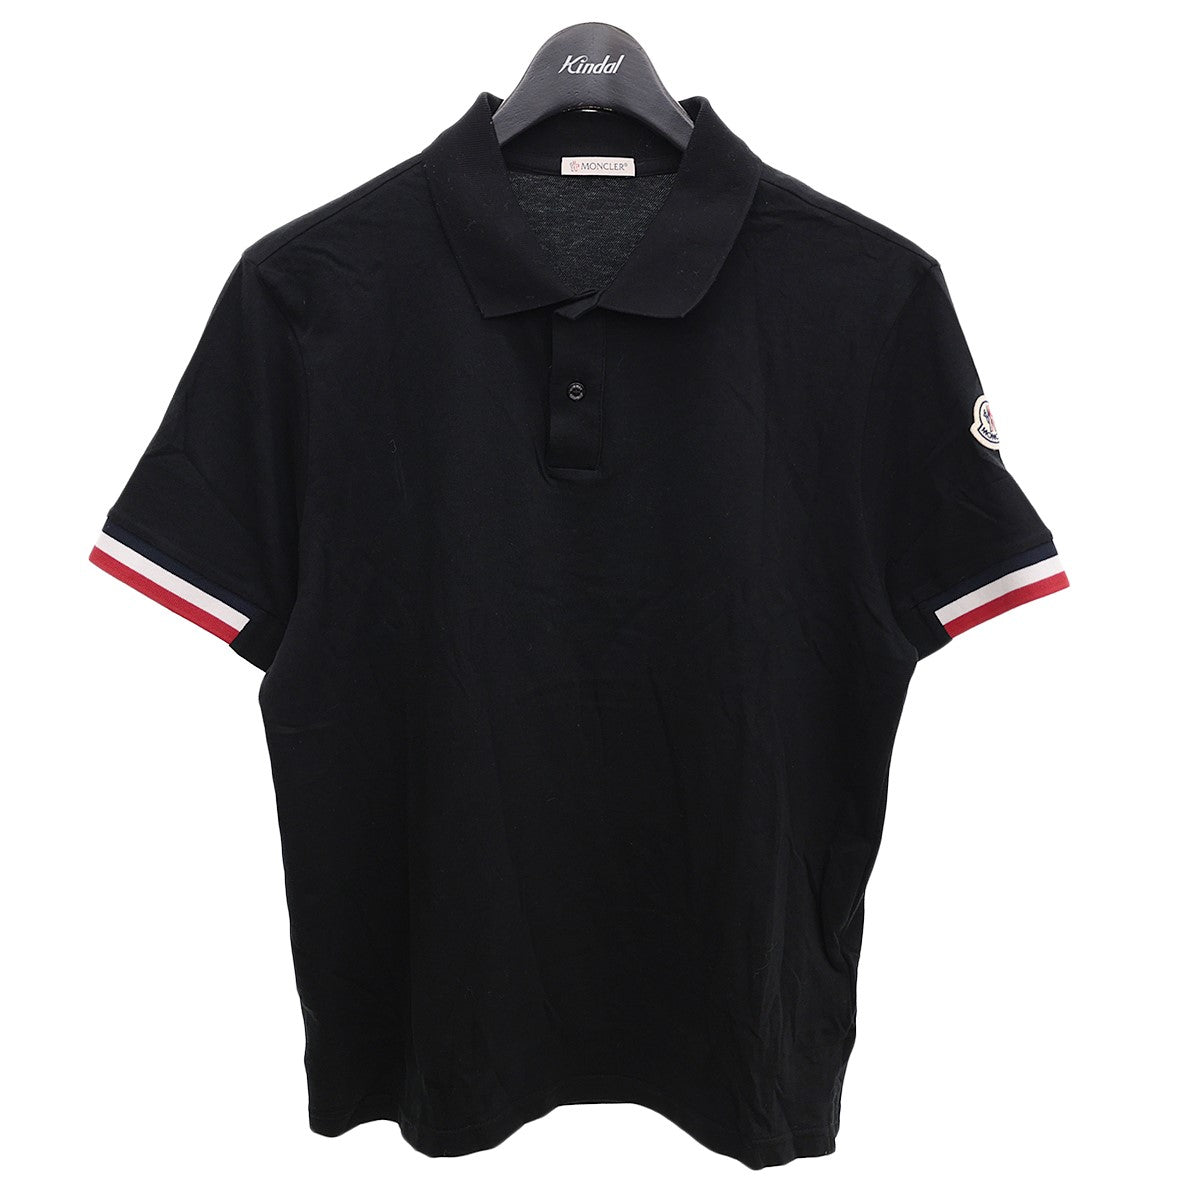 MONCLER(モンクレール) 22SSS S POLO半袖カットソーポロシャツ 